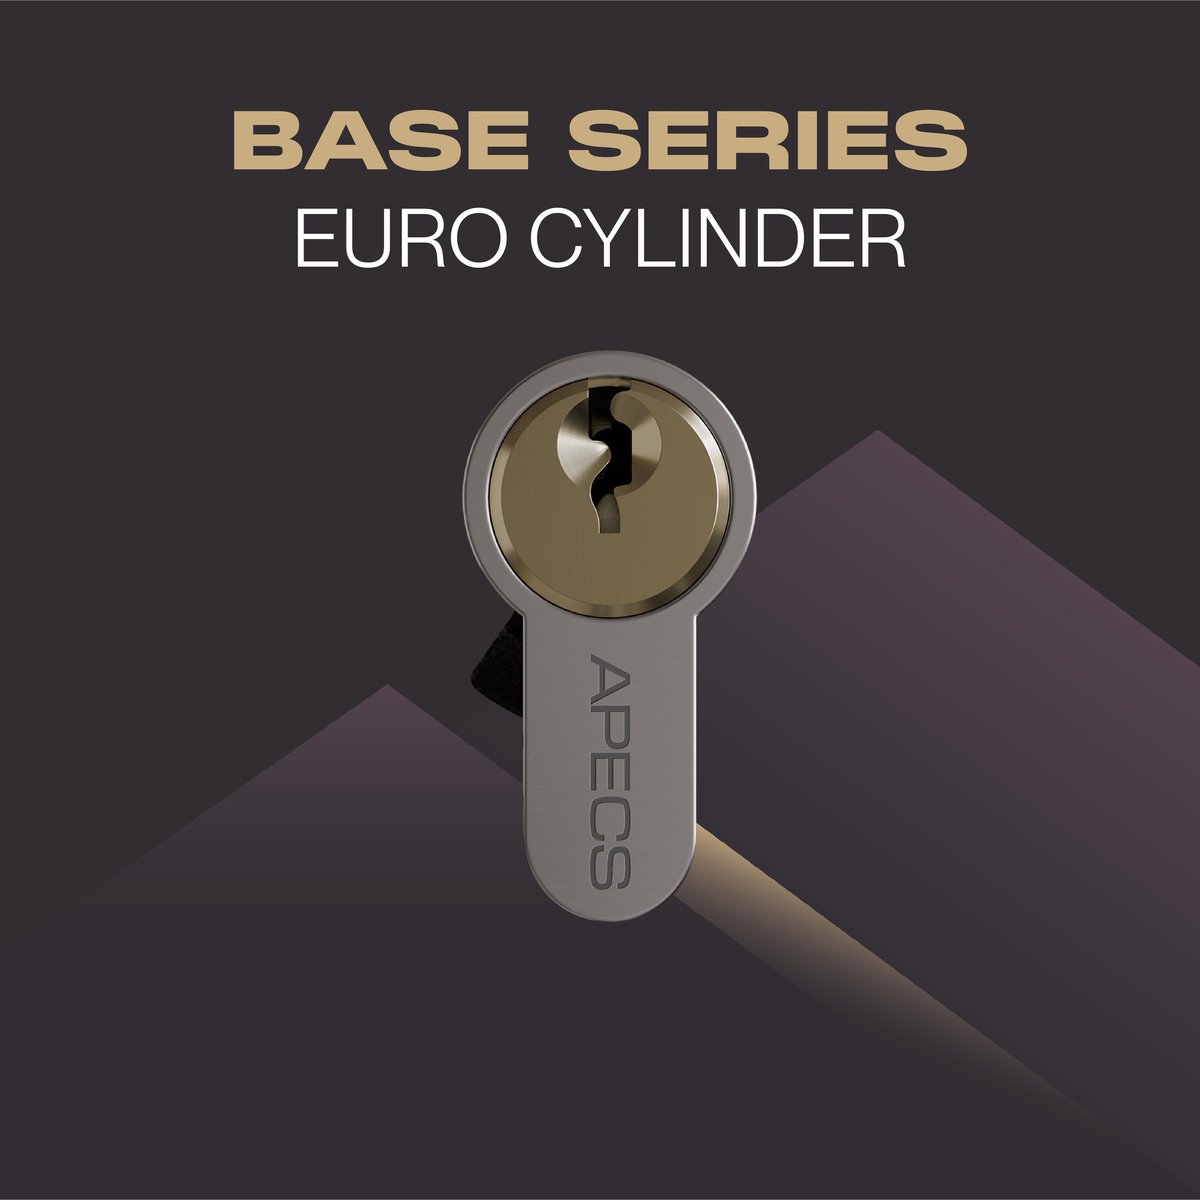 APECS offer a perfect fit for every need and budget! 🌟 🔒 AP Series: Created around our advanced 3* Euro Cylinder. 🔐 XS Series: Featuring our reliable 1* Euro Cylinder. 🗝️ BASE Series: Ideal for entry-level security. Try APECS now! 💼 - apecs.co.uk/auth/signup #APECS